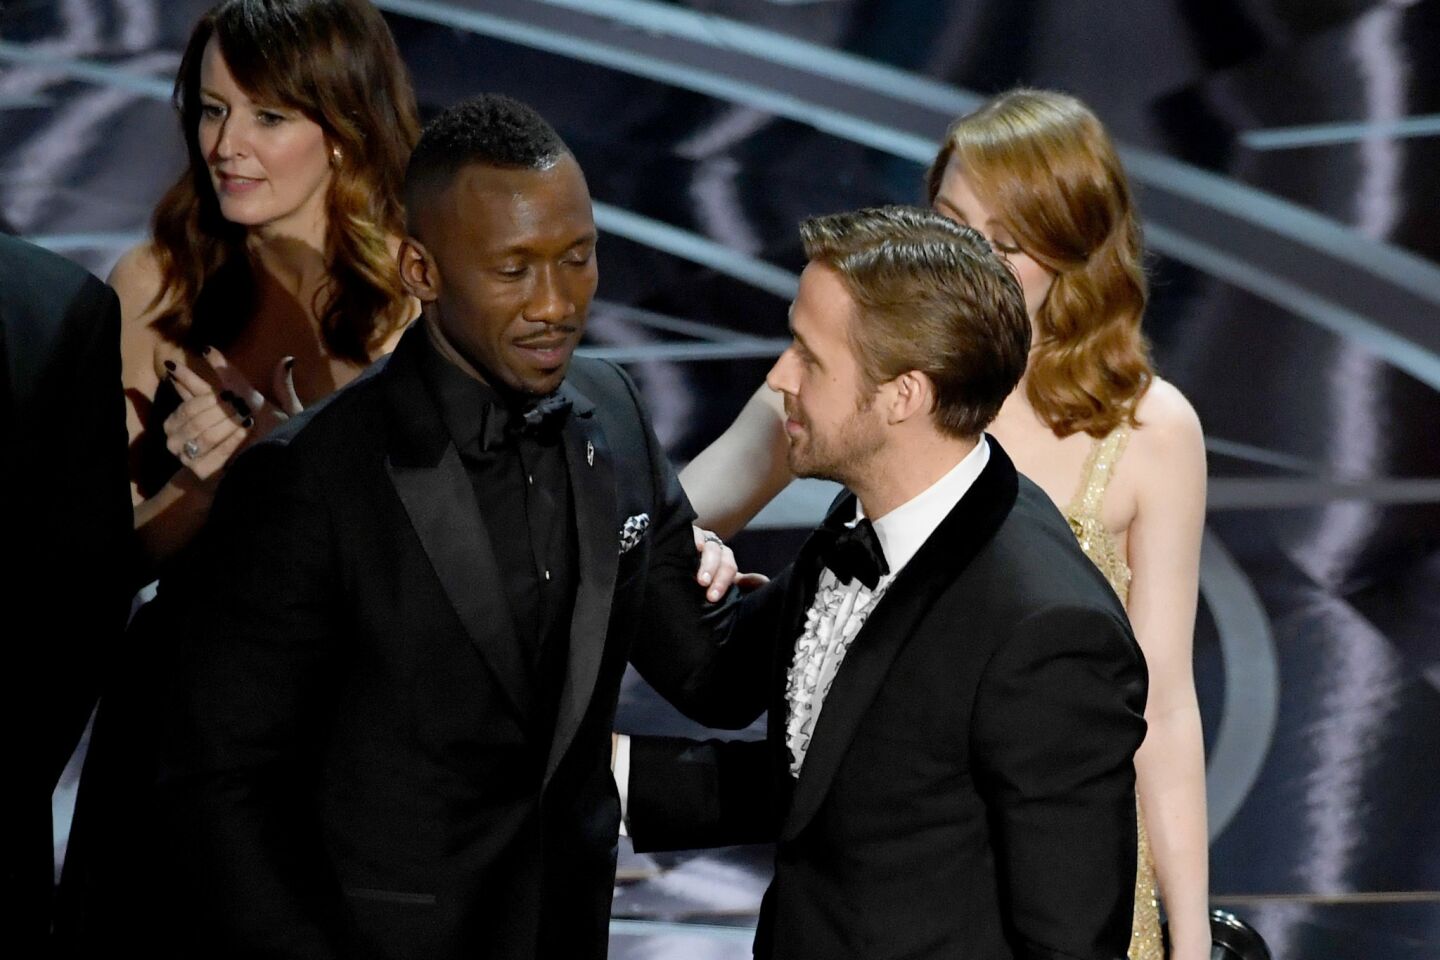 "Moonlight" actor Mahershala Ali, left, with Ryan Gosling and Emma Stone after it was discovered that "La La Land" was mistakenly announced as best picture onstage.